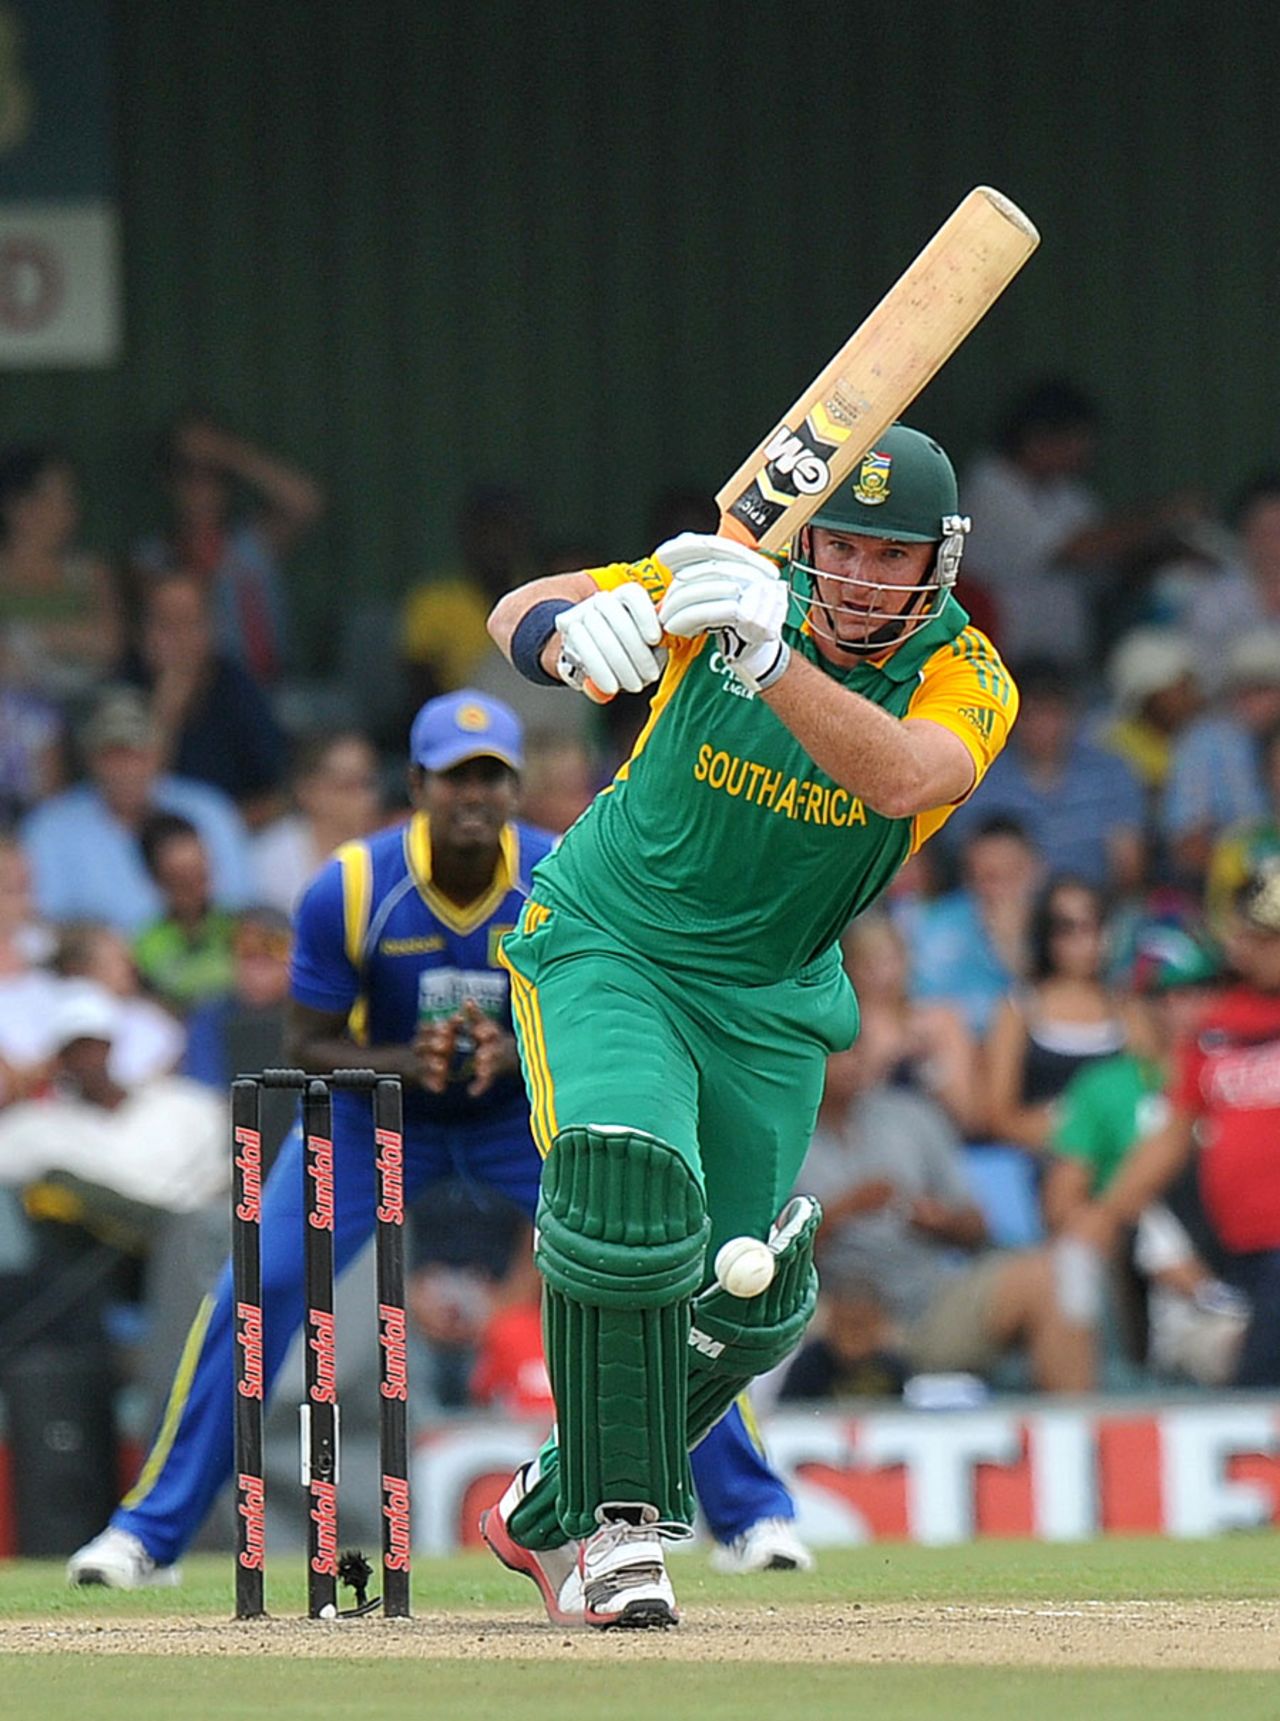 Graeme Smith was involved in a half-century opening stand, South Africa v Sri Lanka, 2nd ODI, East London, January 14, 2012